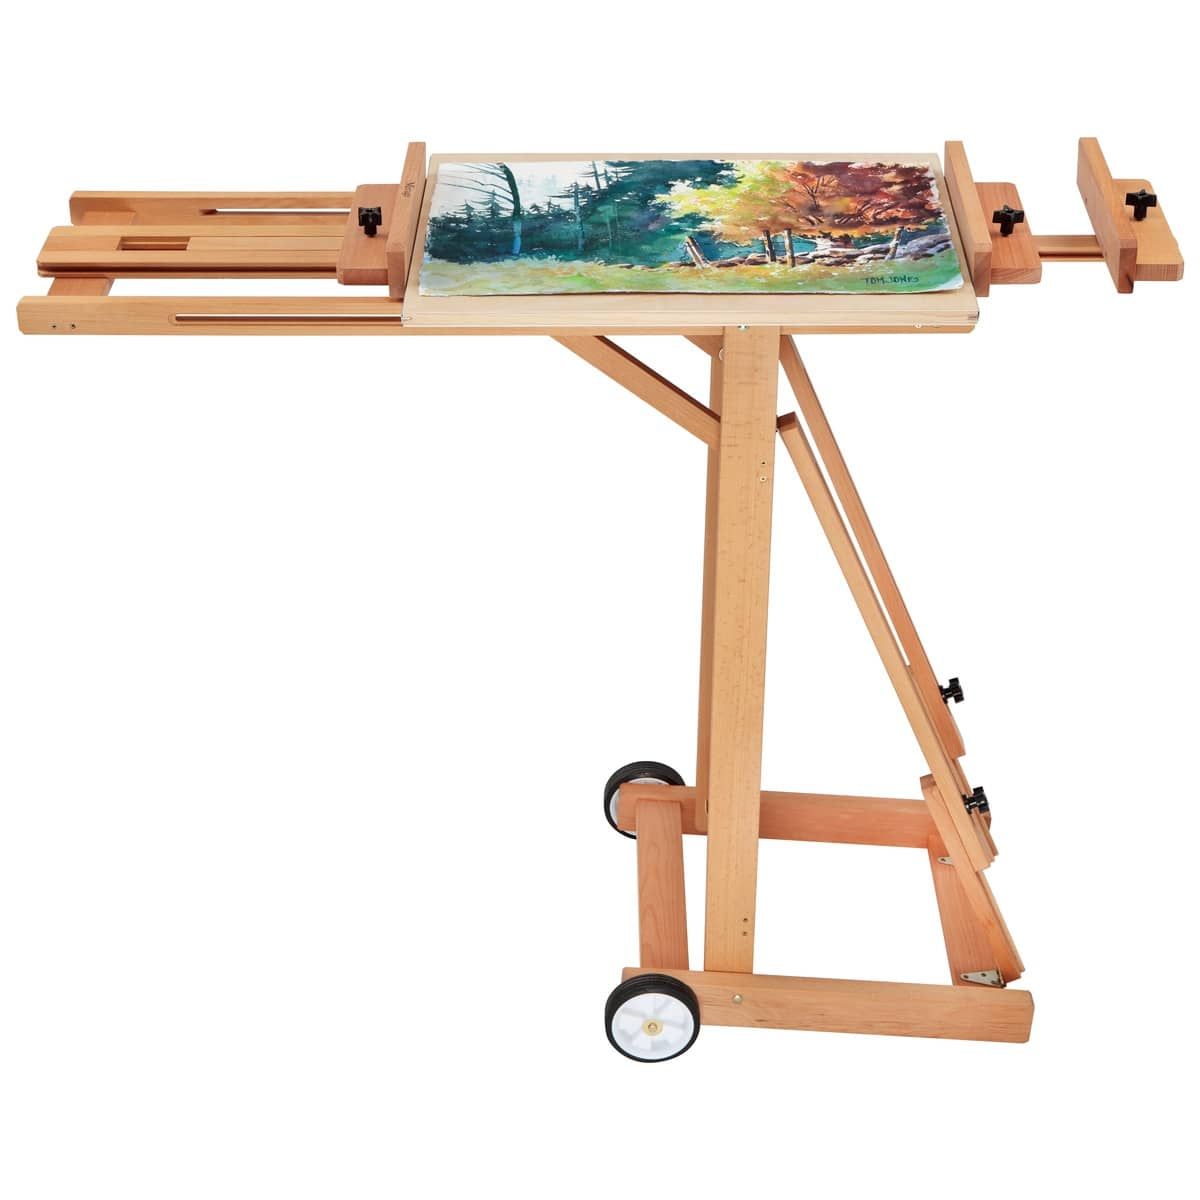 Draw or paint like you would at any drawing table